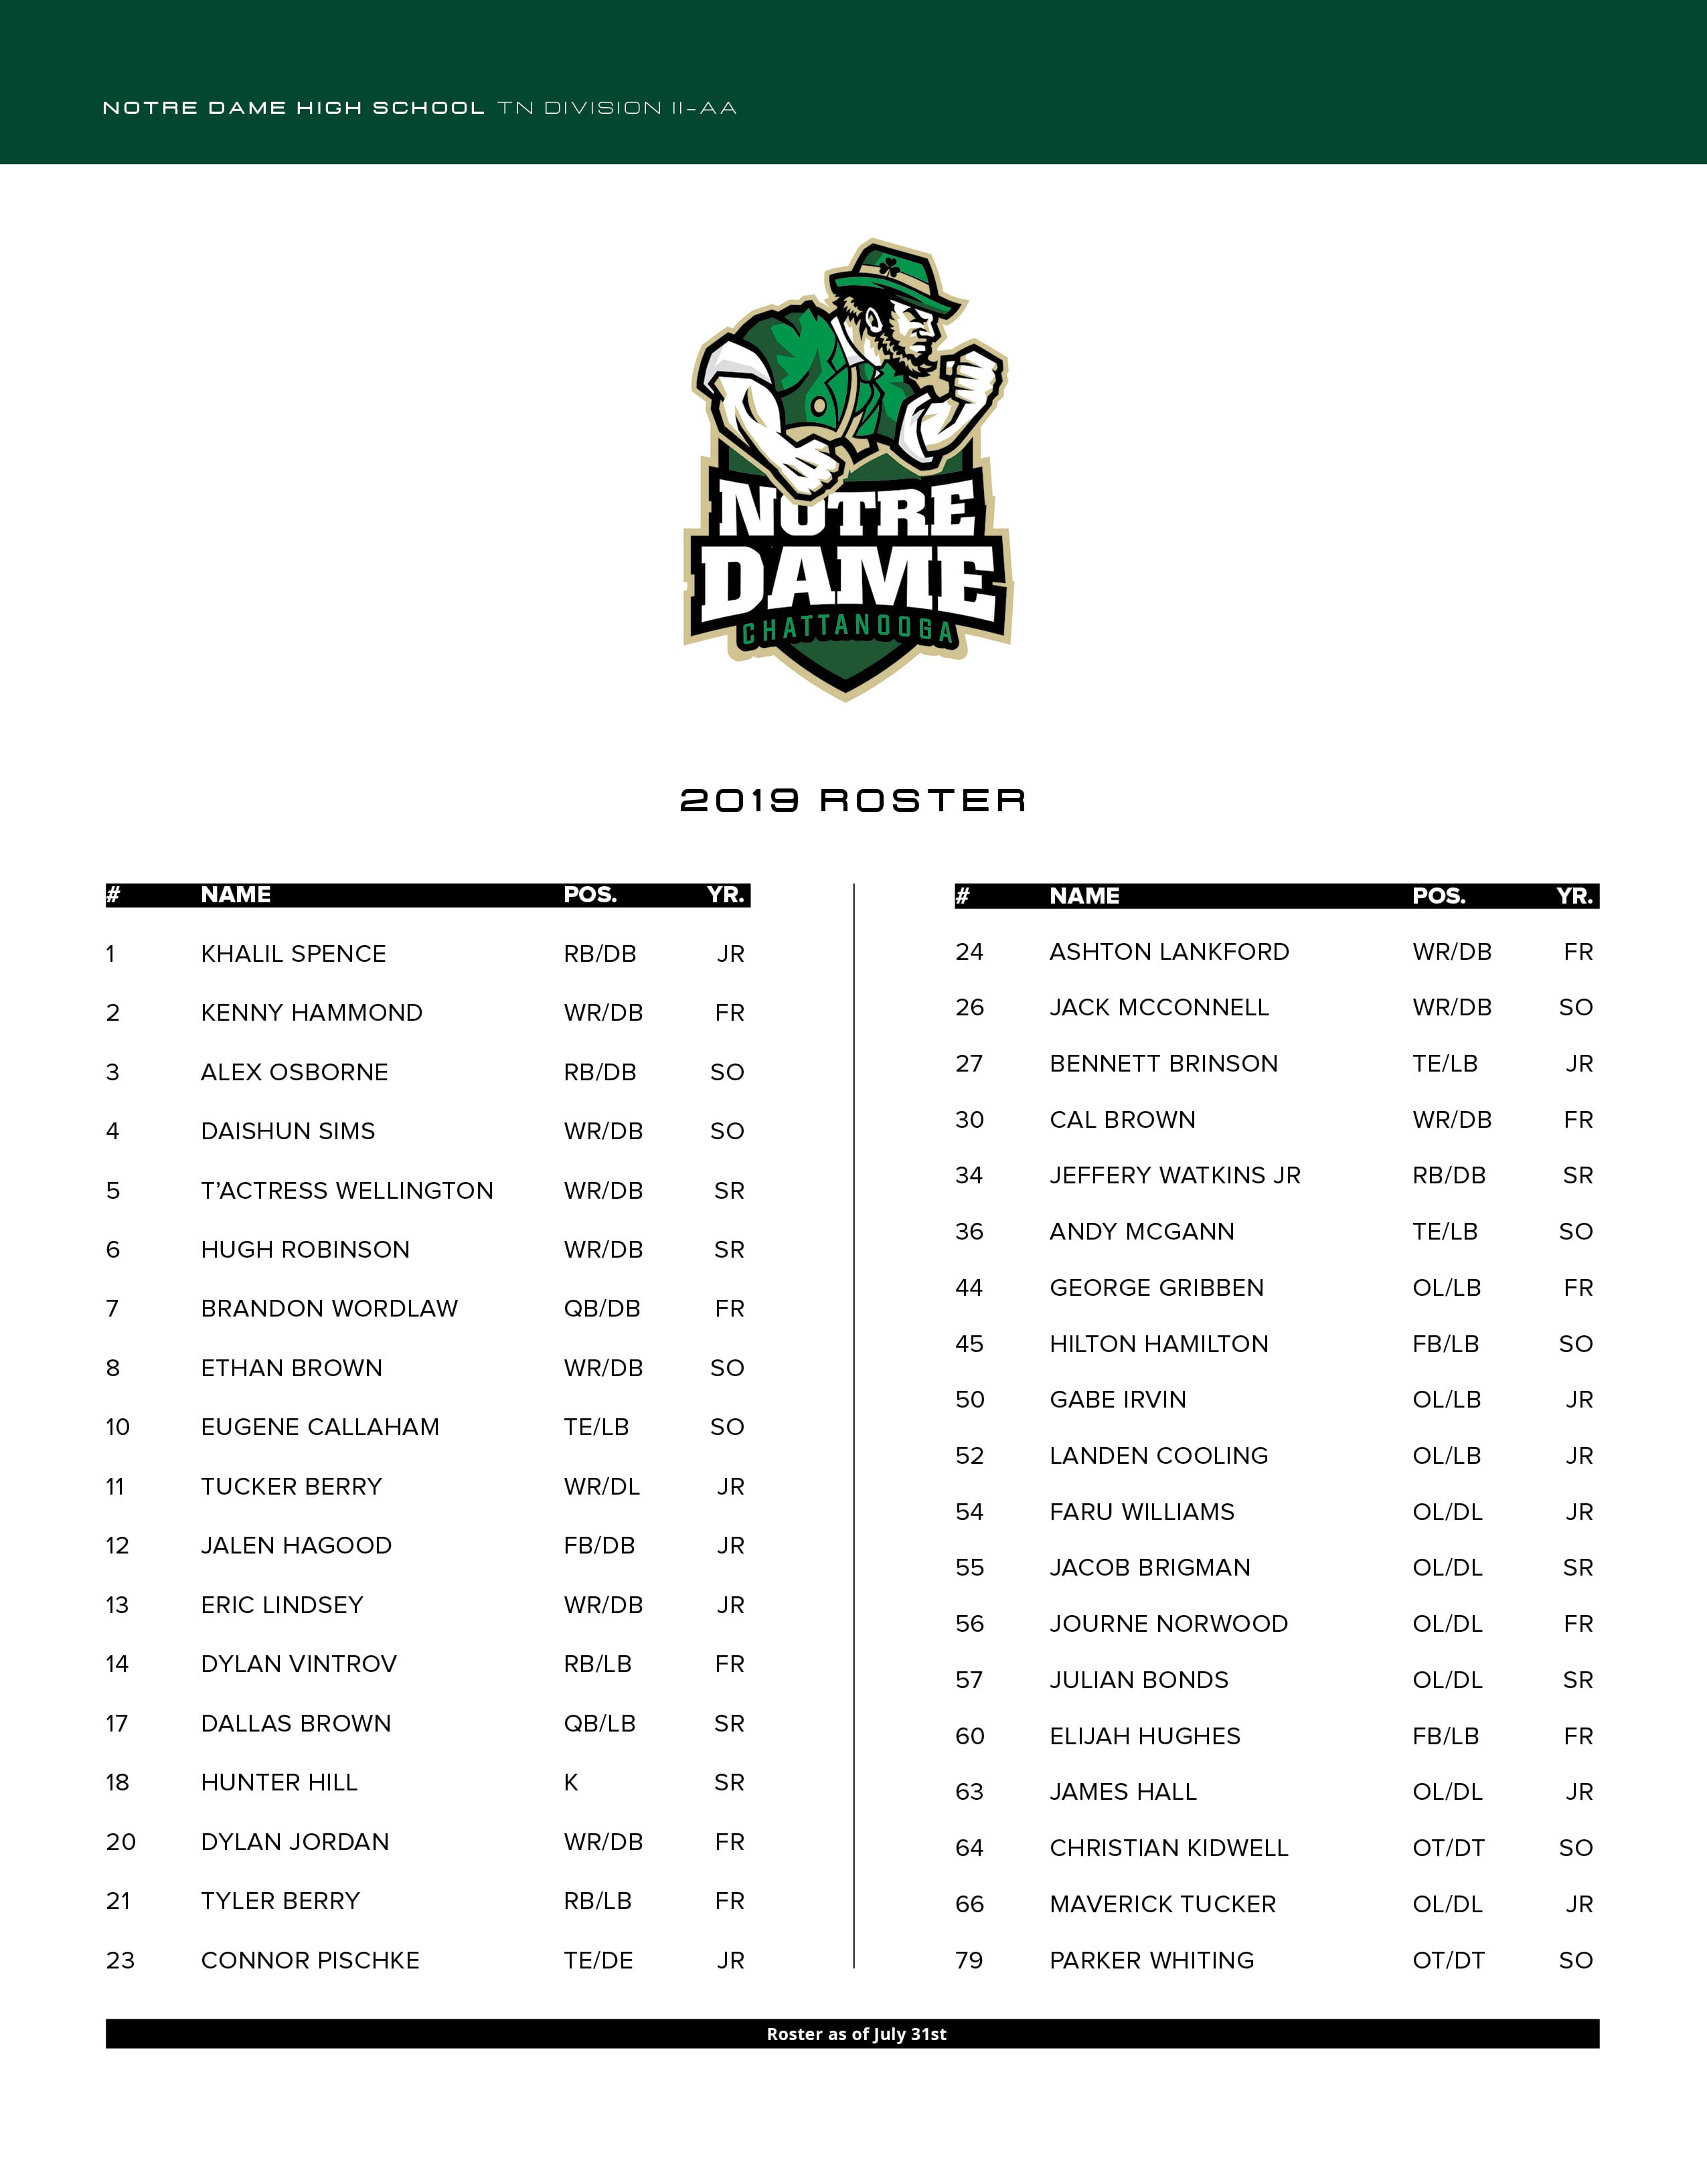 Notre Dame High School Football roster